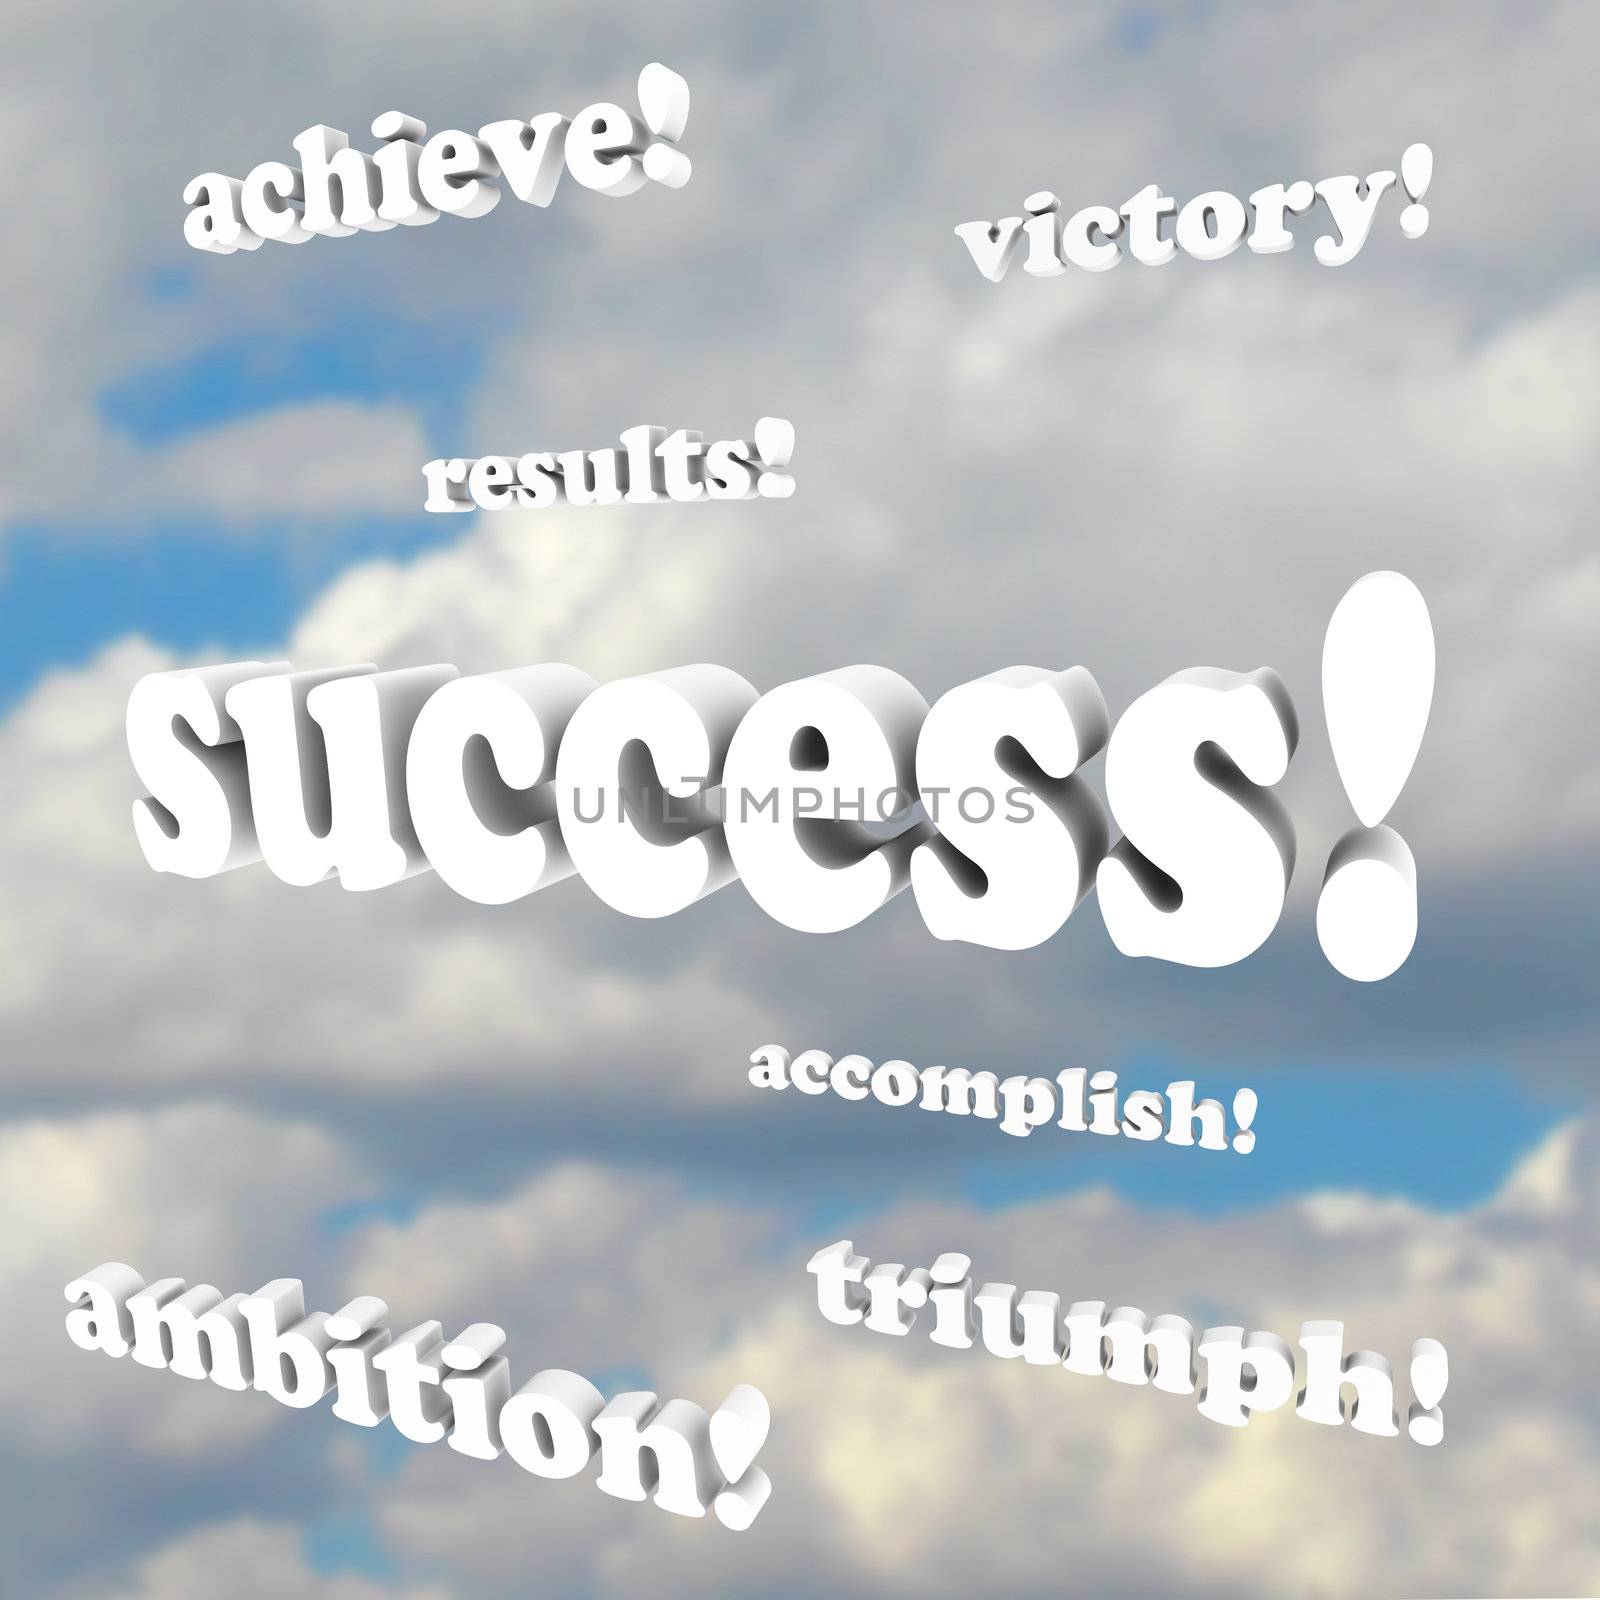 Successful words appear in a blue cloudy sky - success, victory, achieve, results, accomplish, triumph, ambition